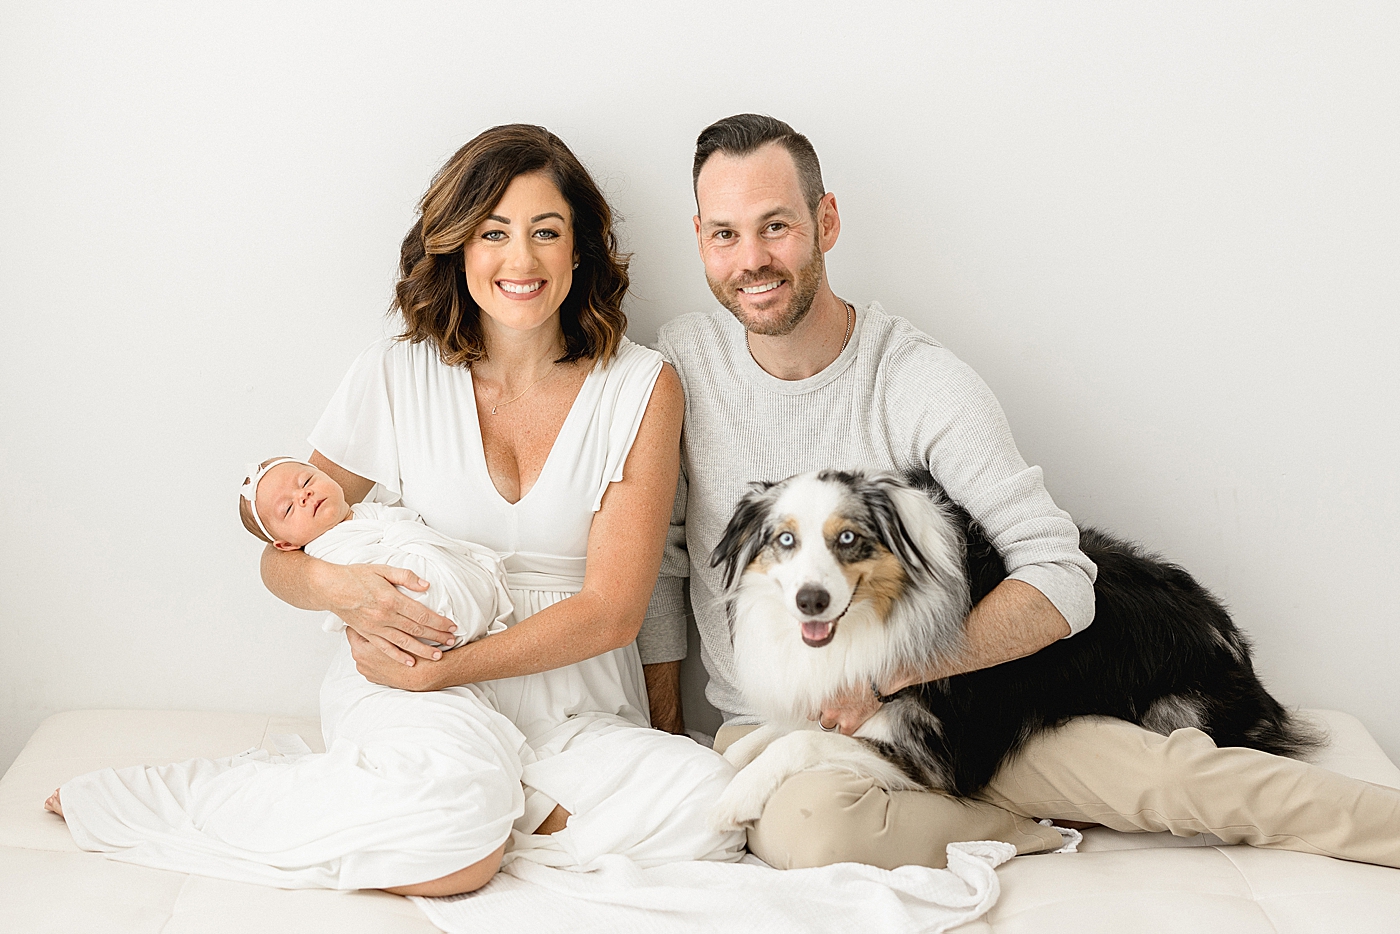 Family portrait with mom, dad, baby girl and their family dog. Photo by Brittany Elise Photography.